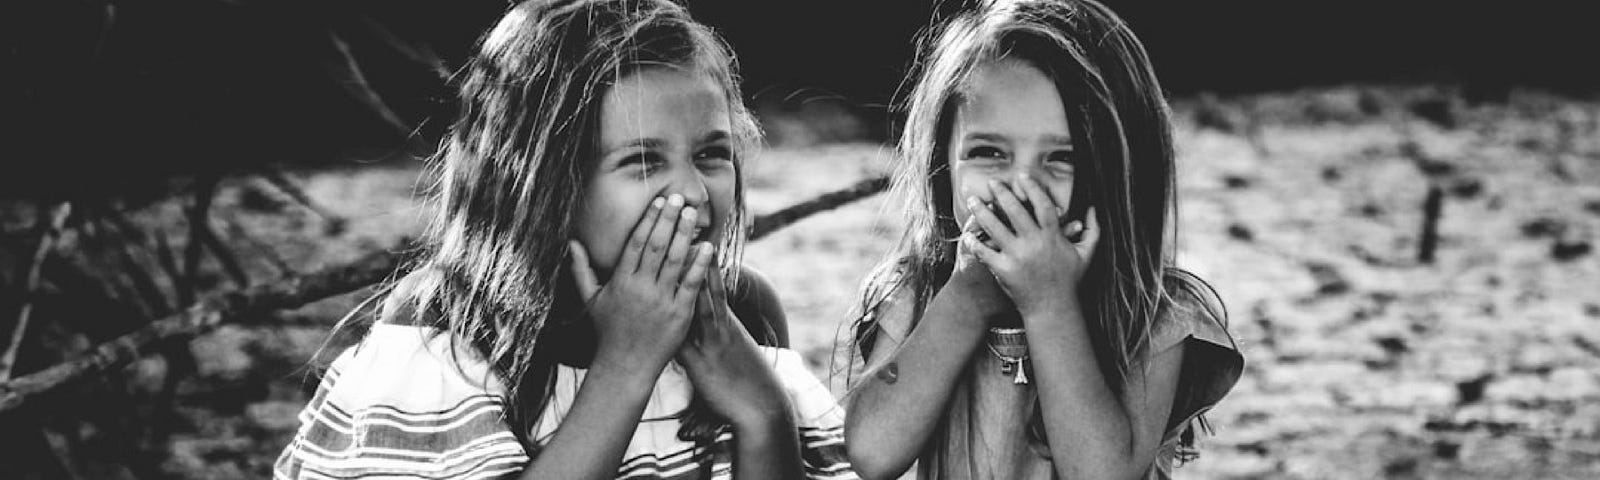 Black and white photo of two young girls gigglling.